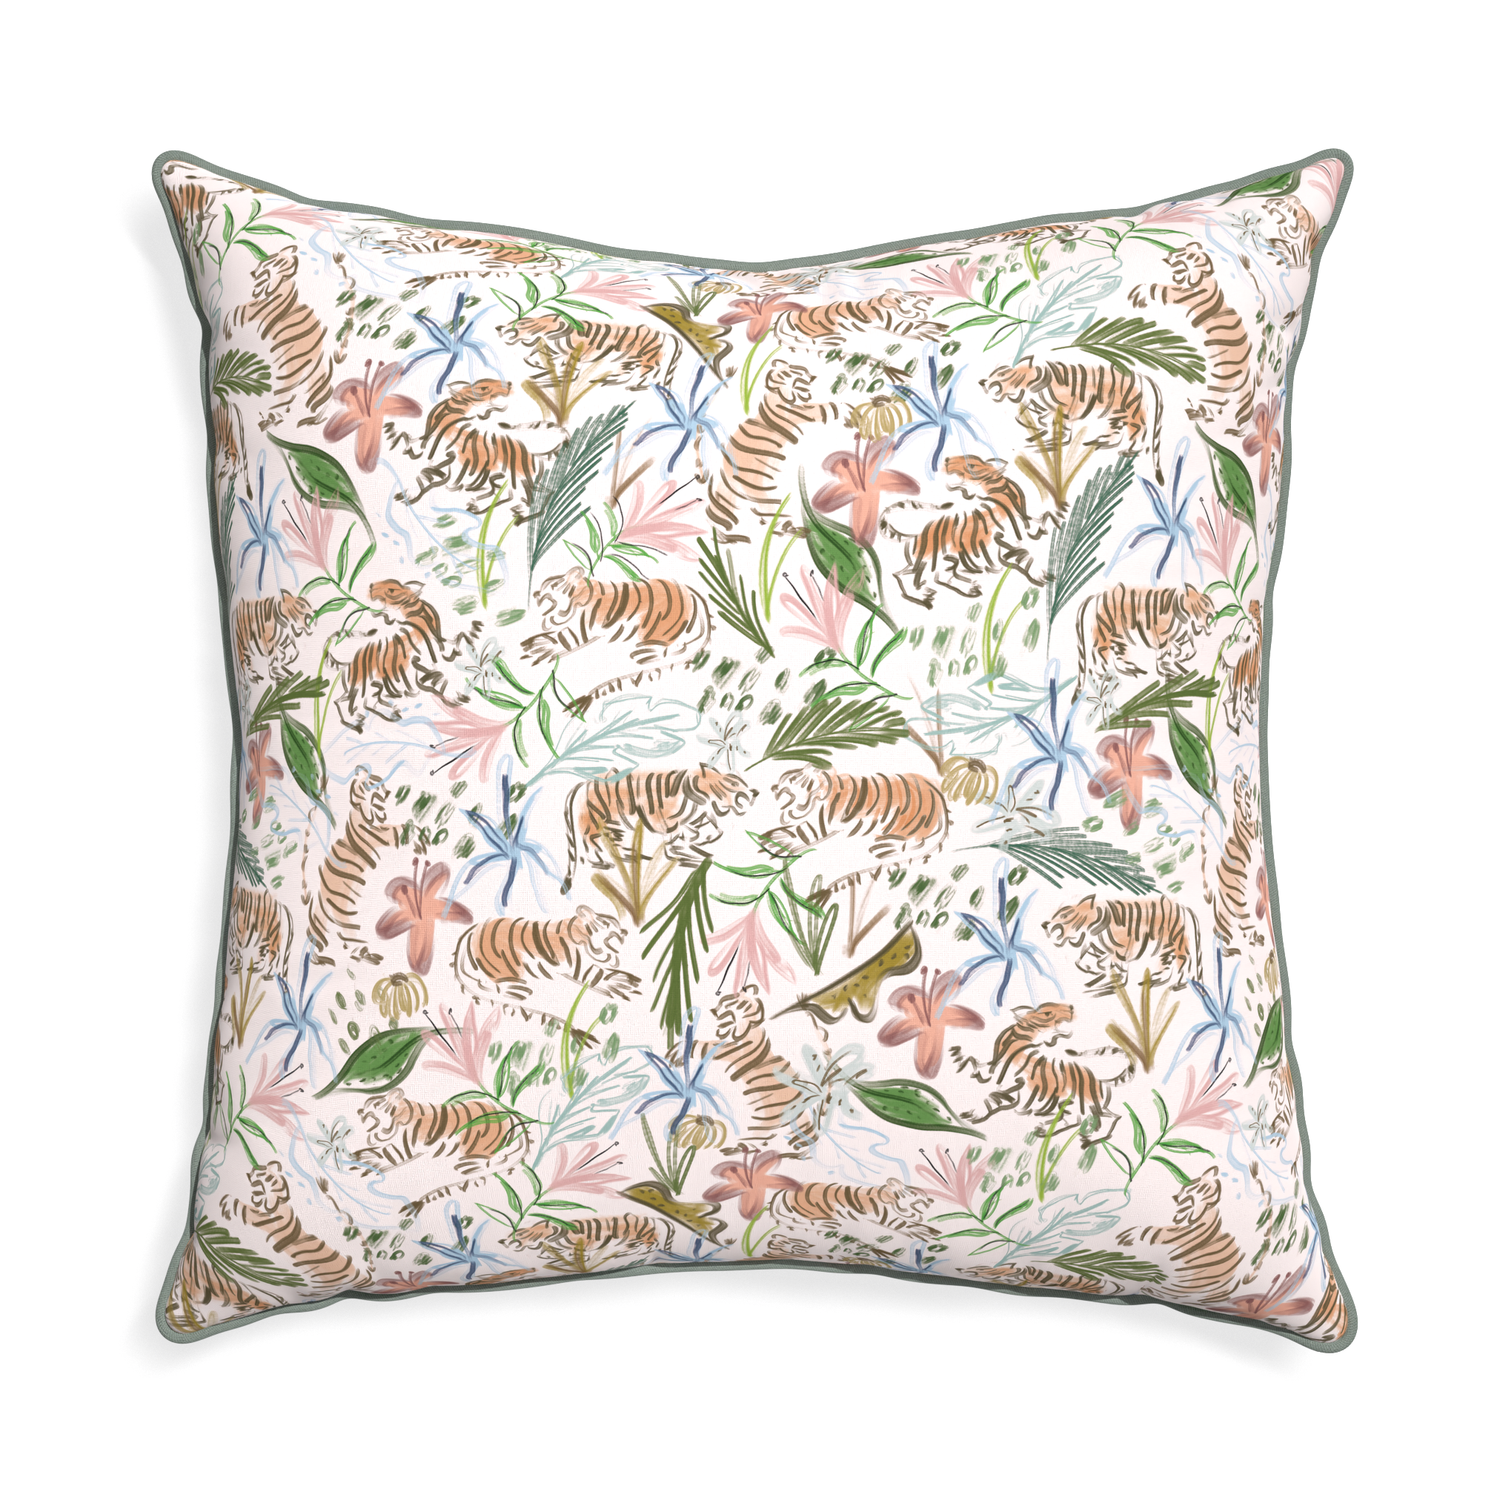 Euro-sham frida pink custom pink chinoiserie tigerpillow with sage piping on white background